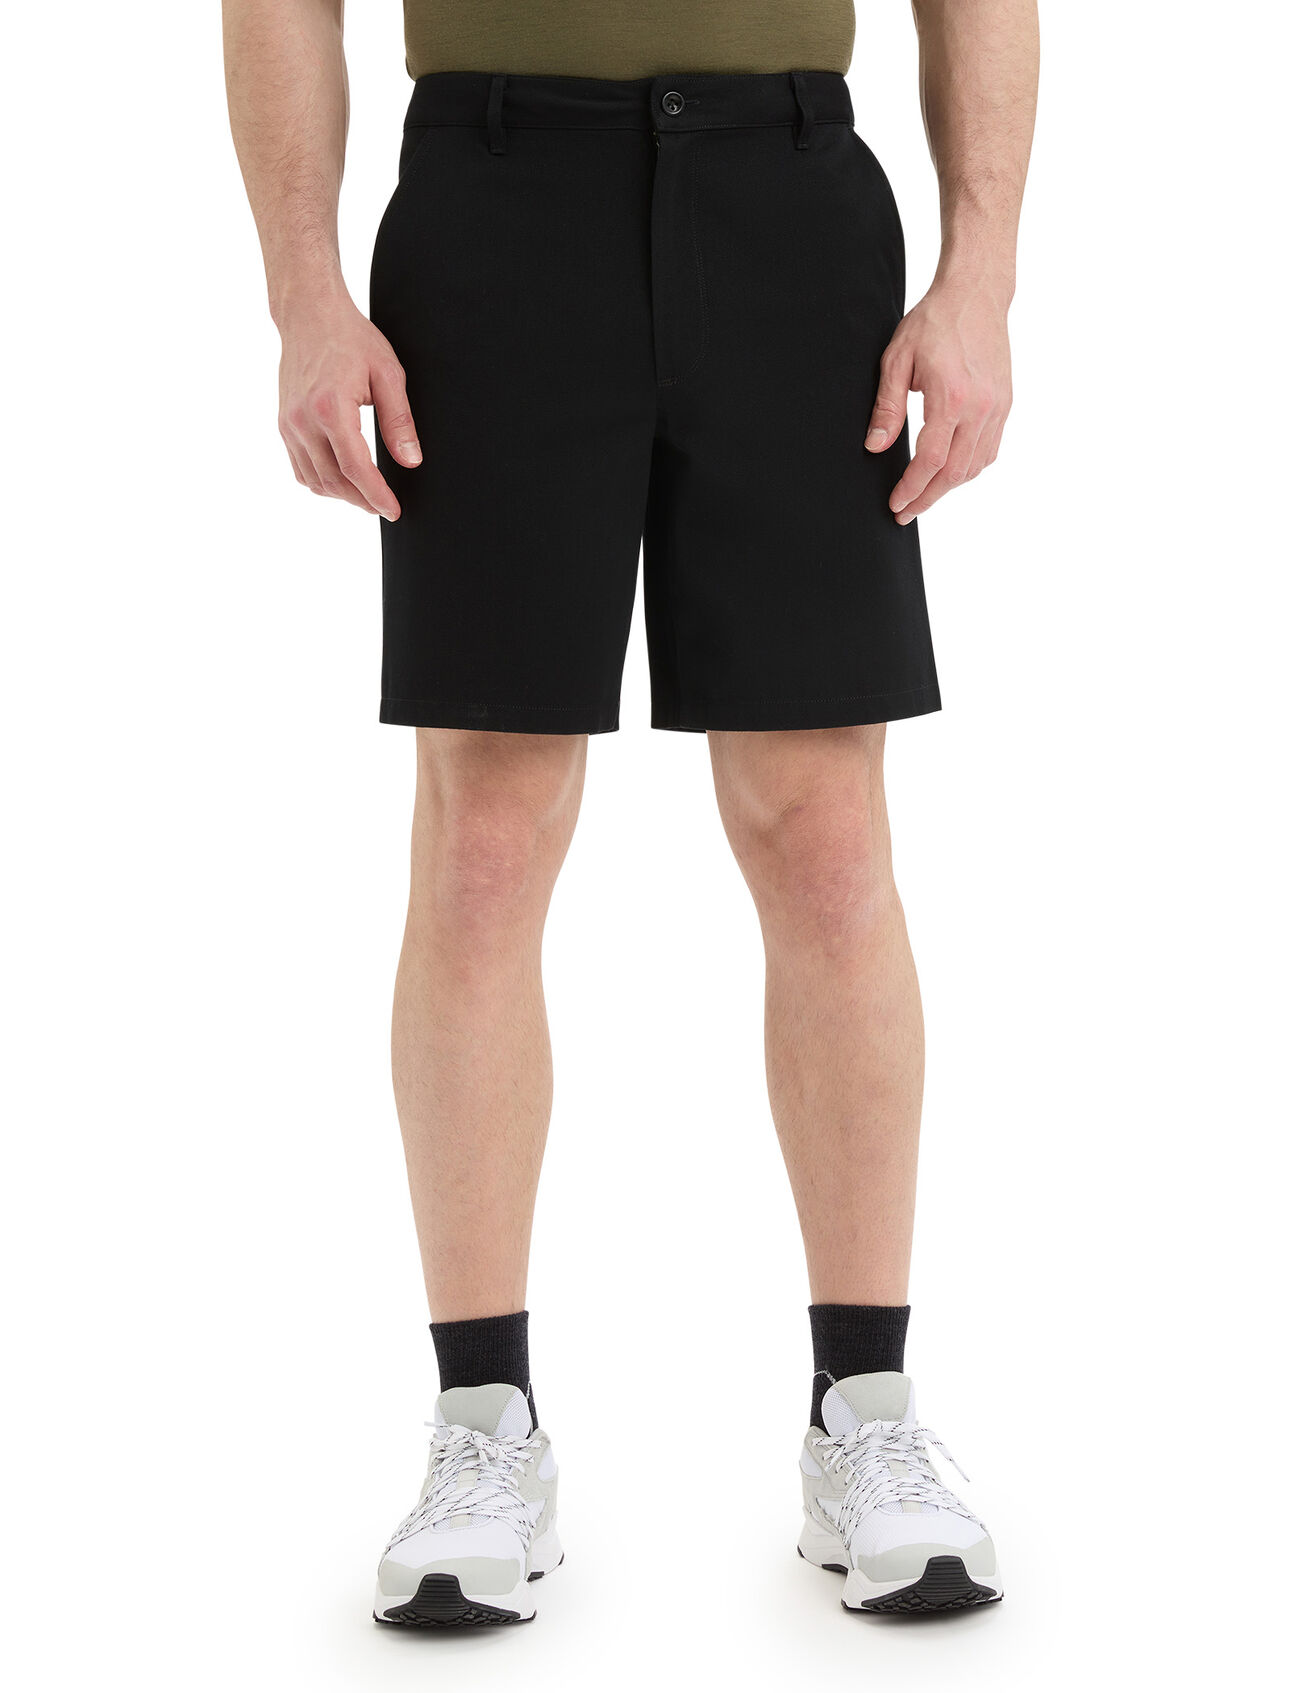 para hombre Merino Berlin Shorts A classic and versatile chino short, the Berlin Shorts feature a unique  blend of natural merino wool and organically grown cotton.